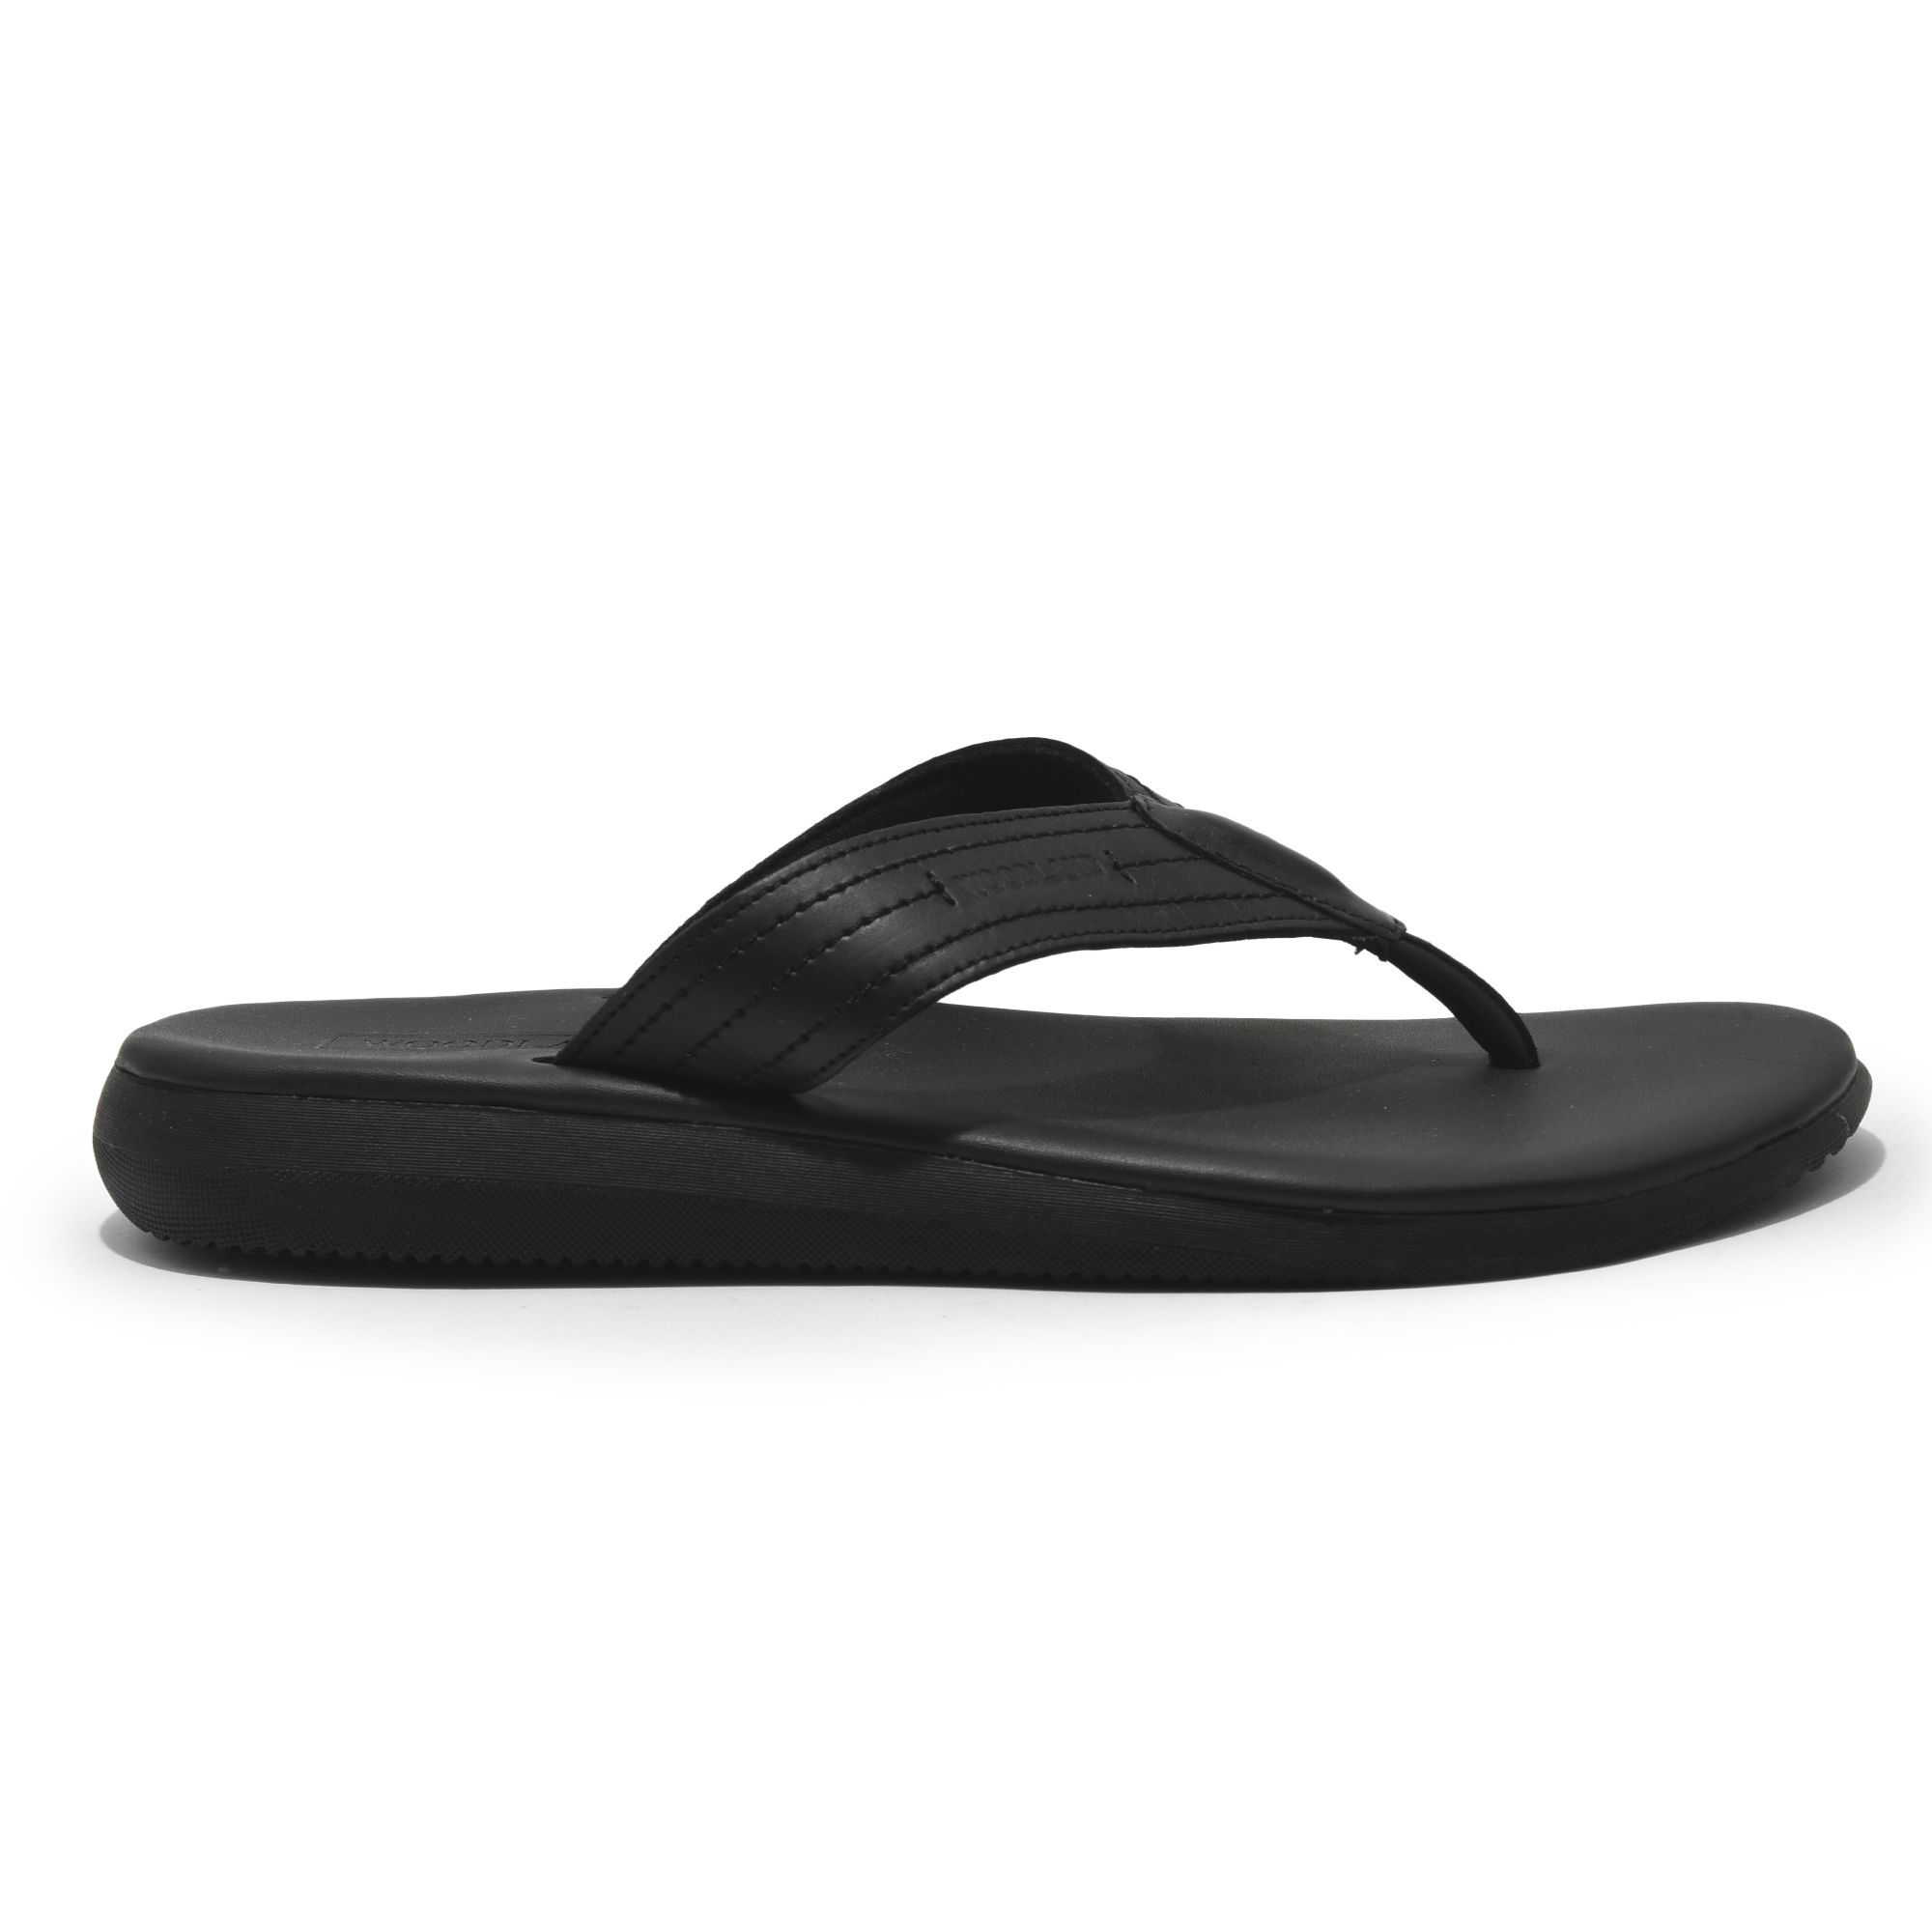 Top more than 246 ot slippers online super hot